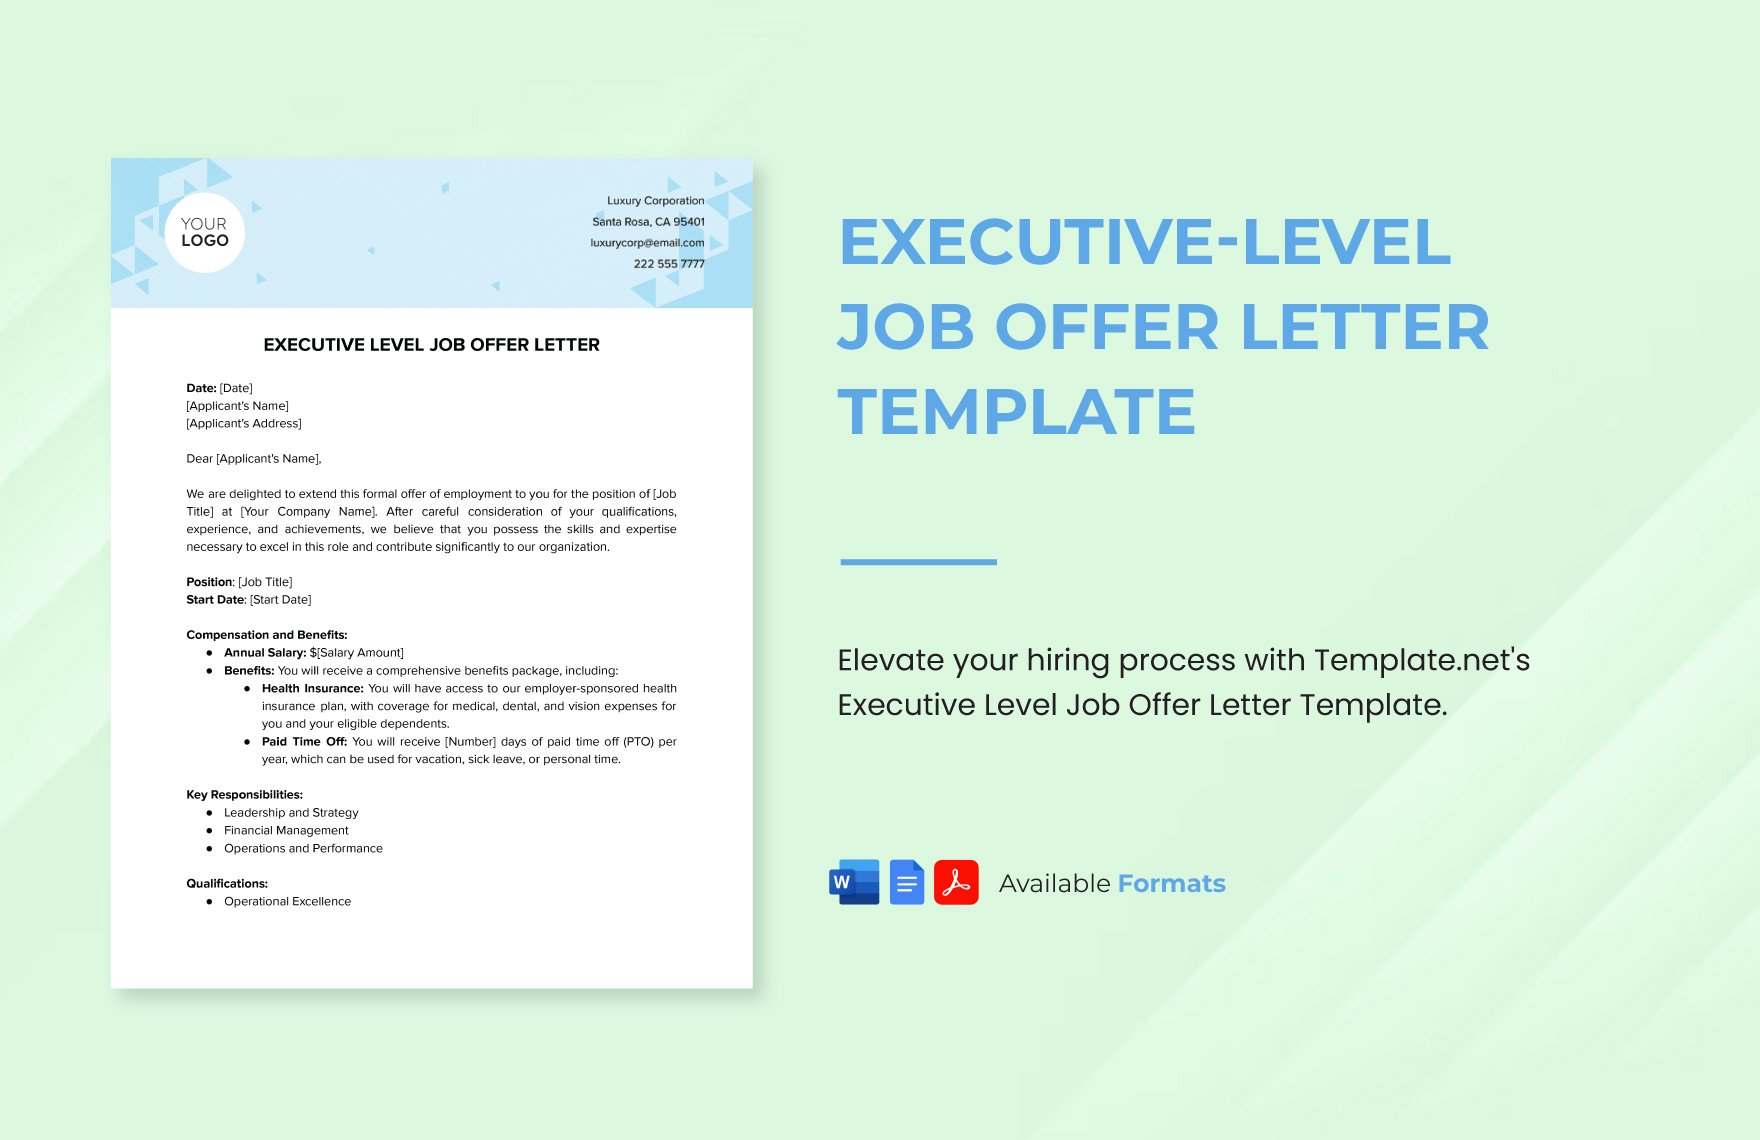 Executive-Level Job Offer Letter Template in Word, Google Docs, PDF